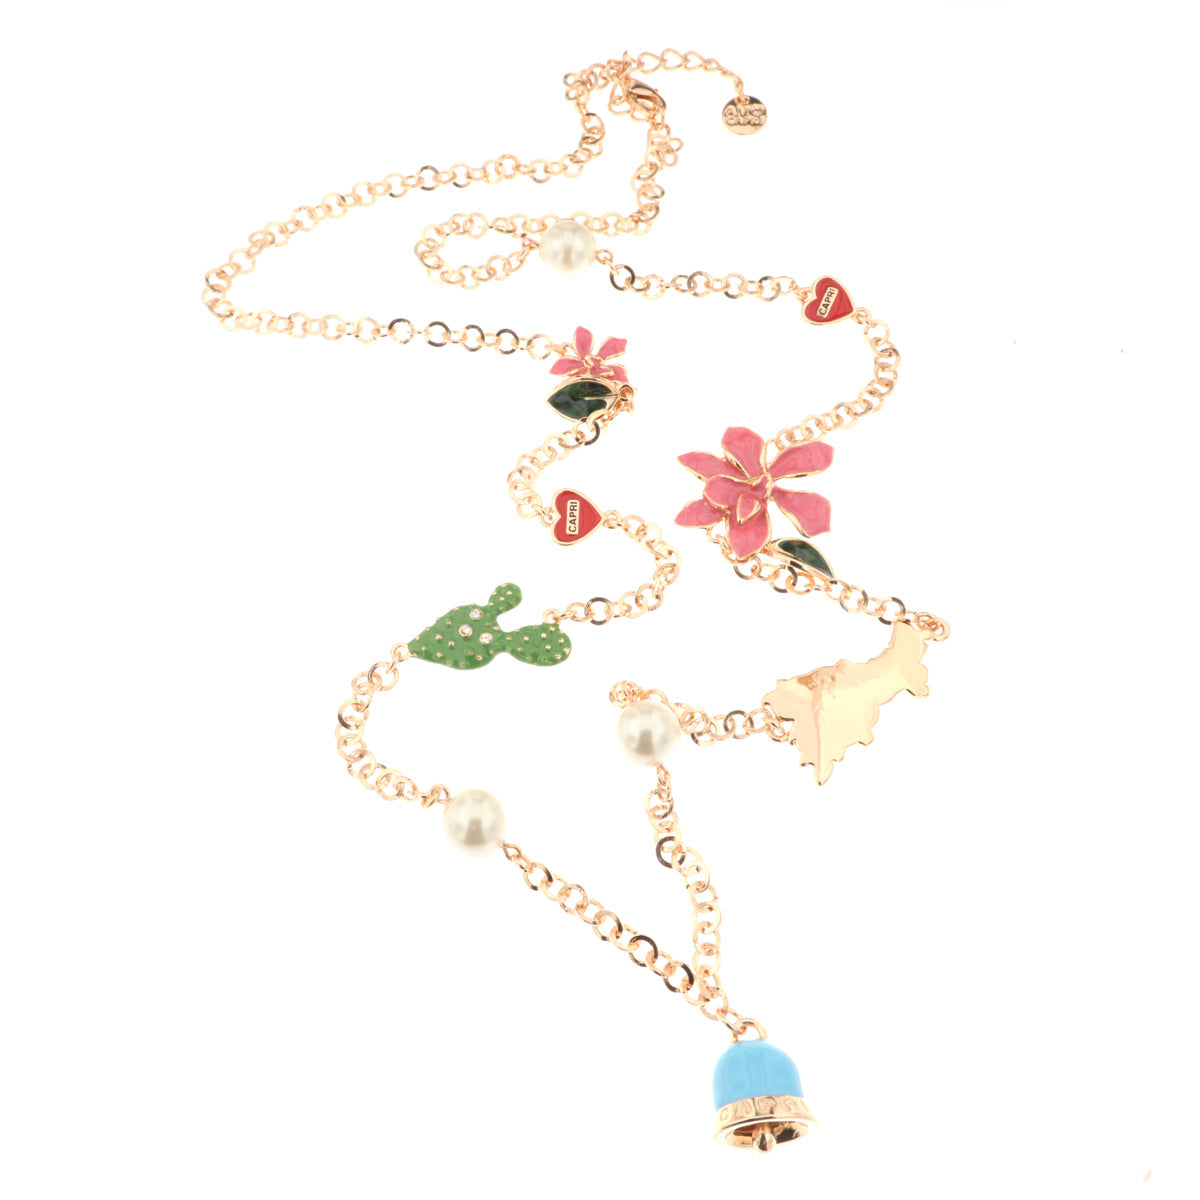 Metal necklace with flowers, heart with capri writing, cactus, campania and pendant bell